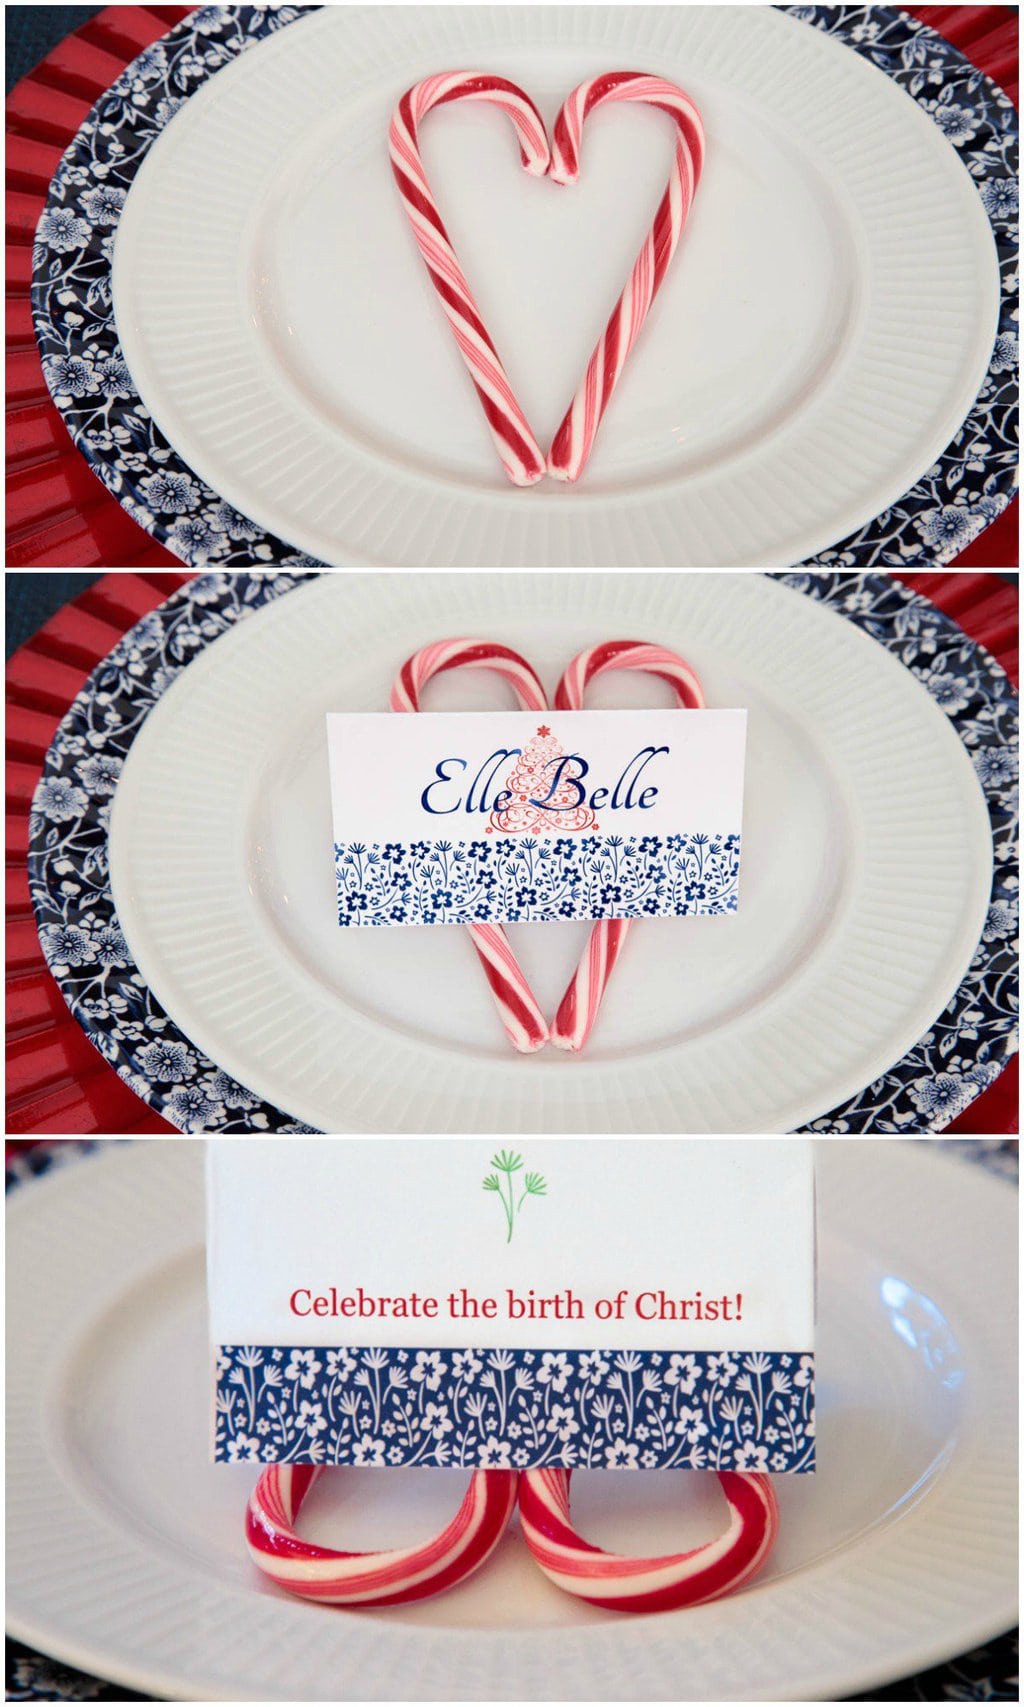 A photo collage showing table name tags for the holidays.